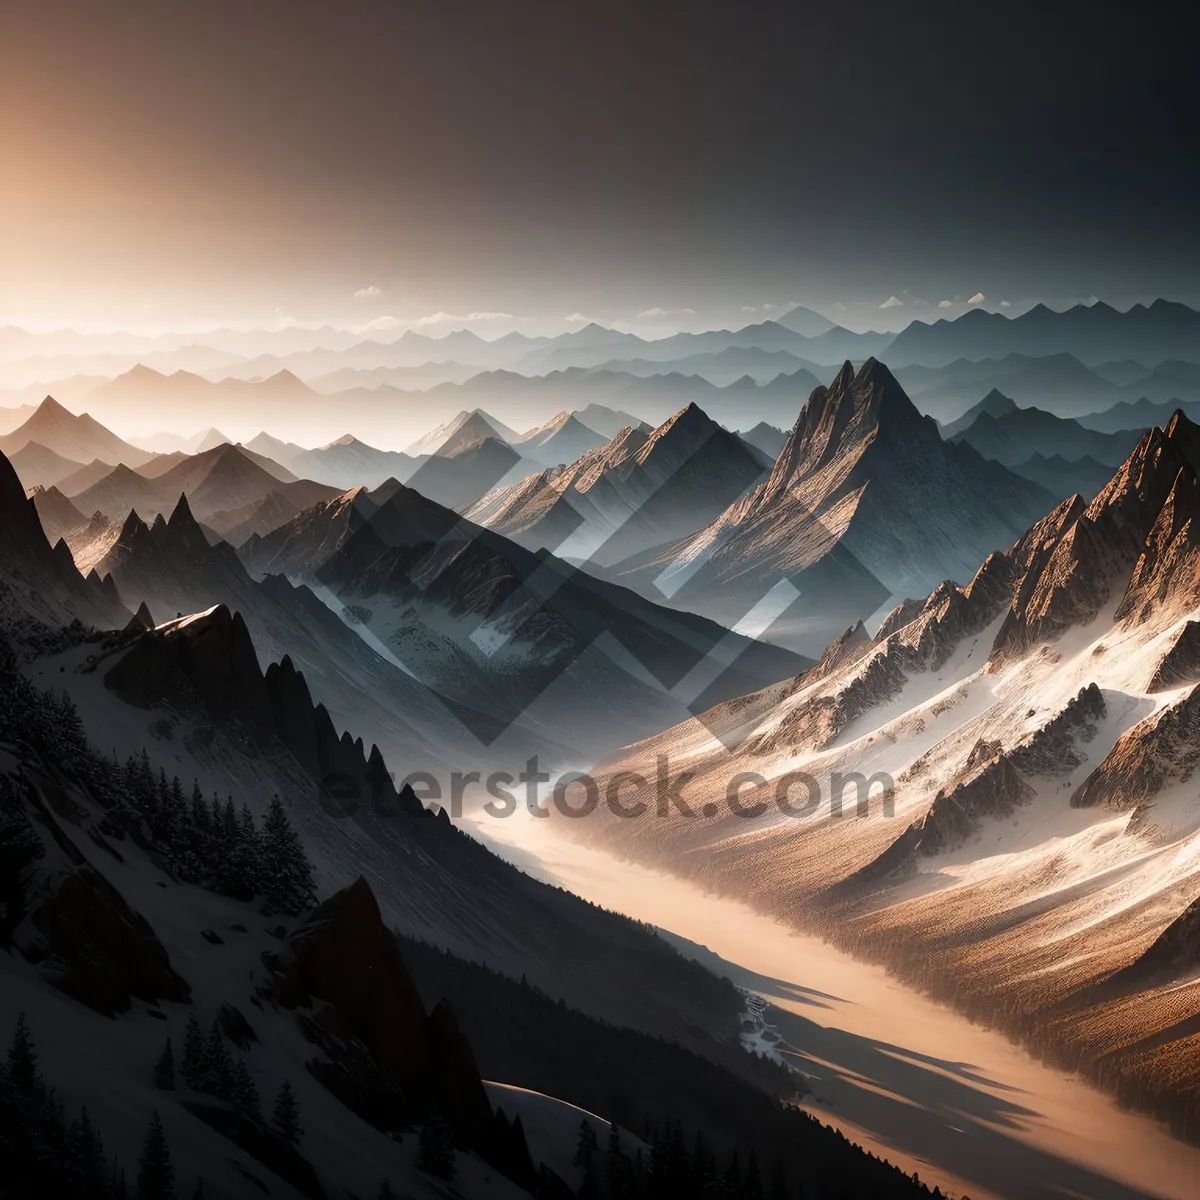 Picture of Snow-capped Majestic Alpine Mountain Range